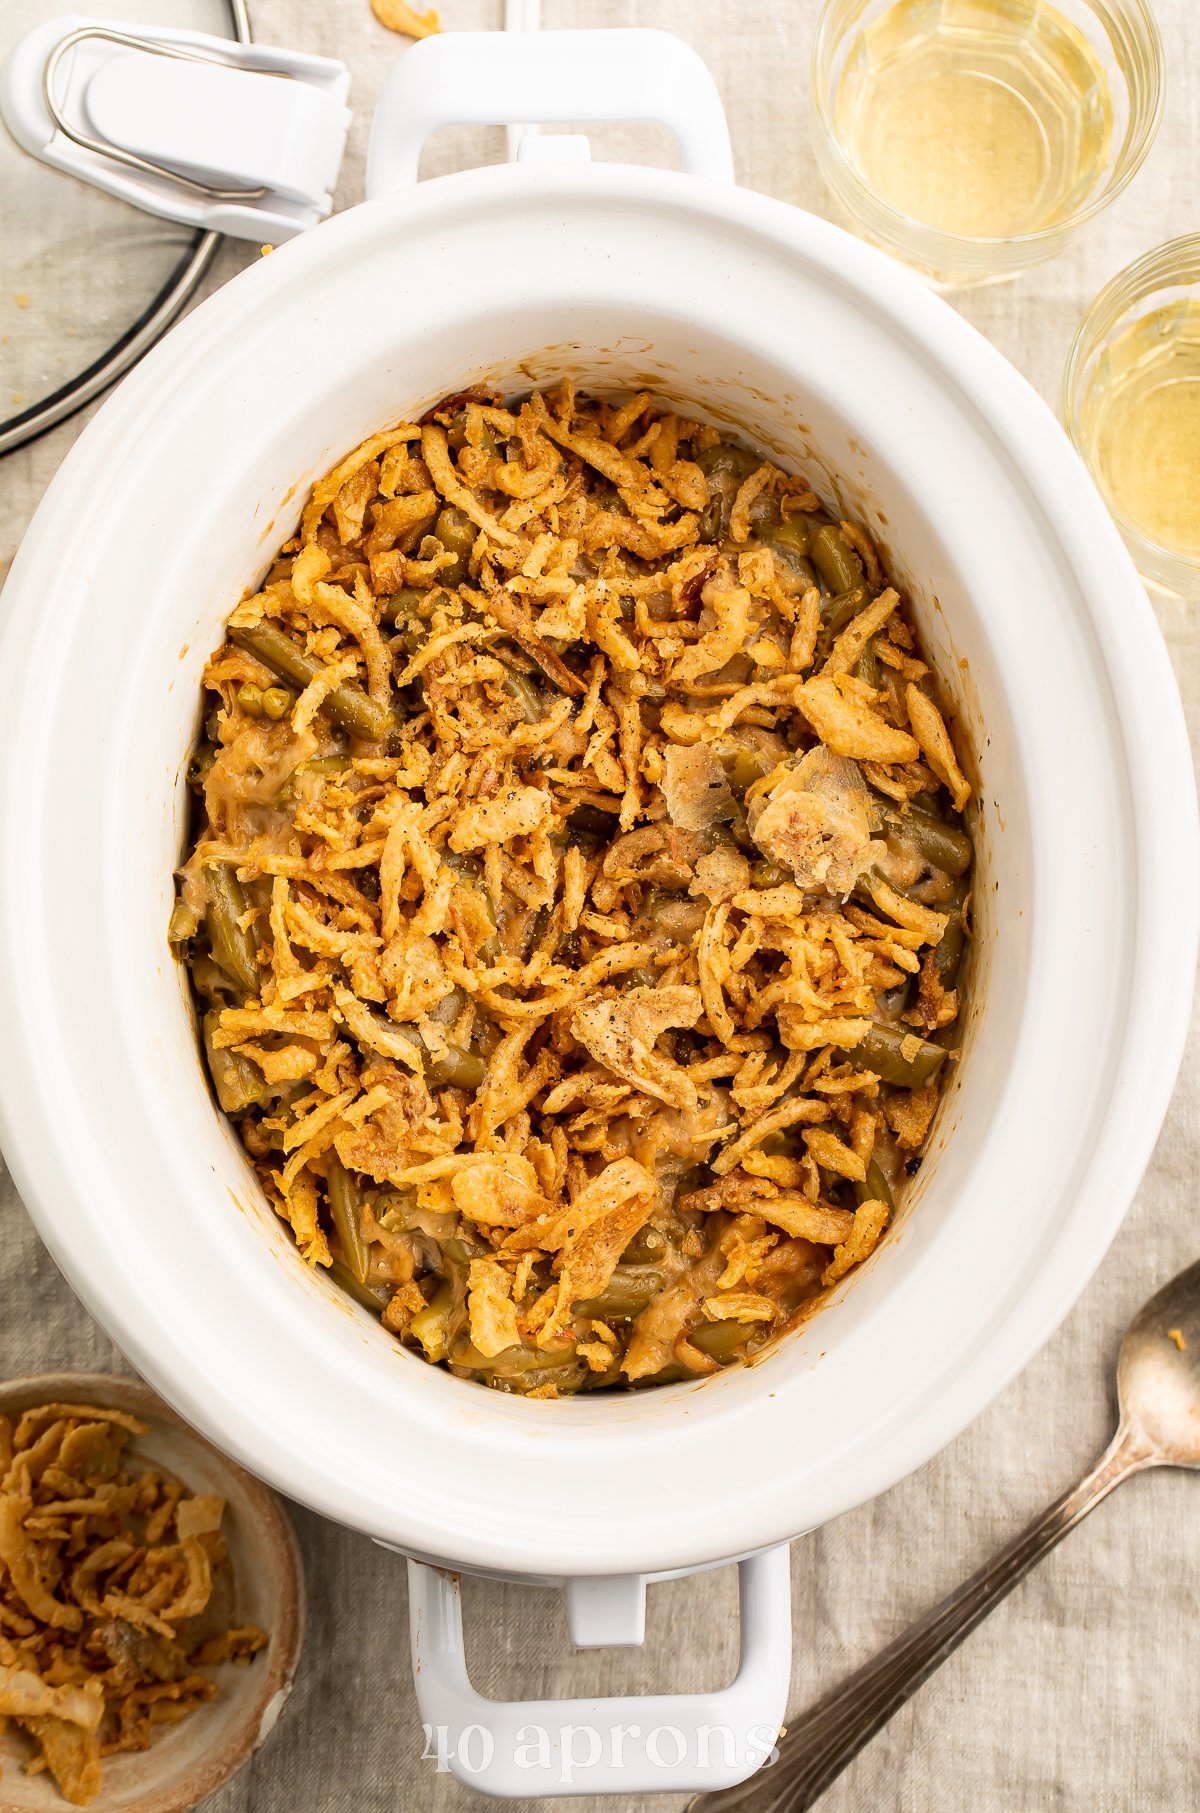 Overhead view of a white oval Crockpot containing a green bean casserole topped with crispy fried onions on a neutral tabletop.